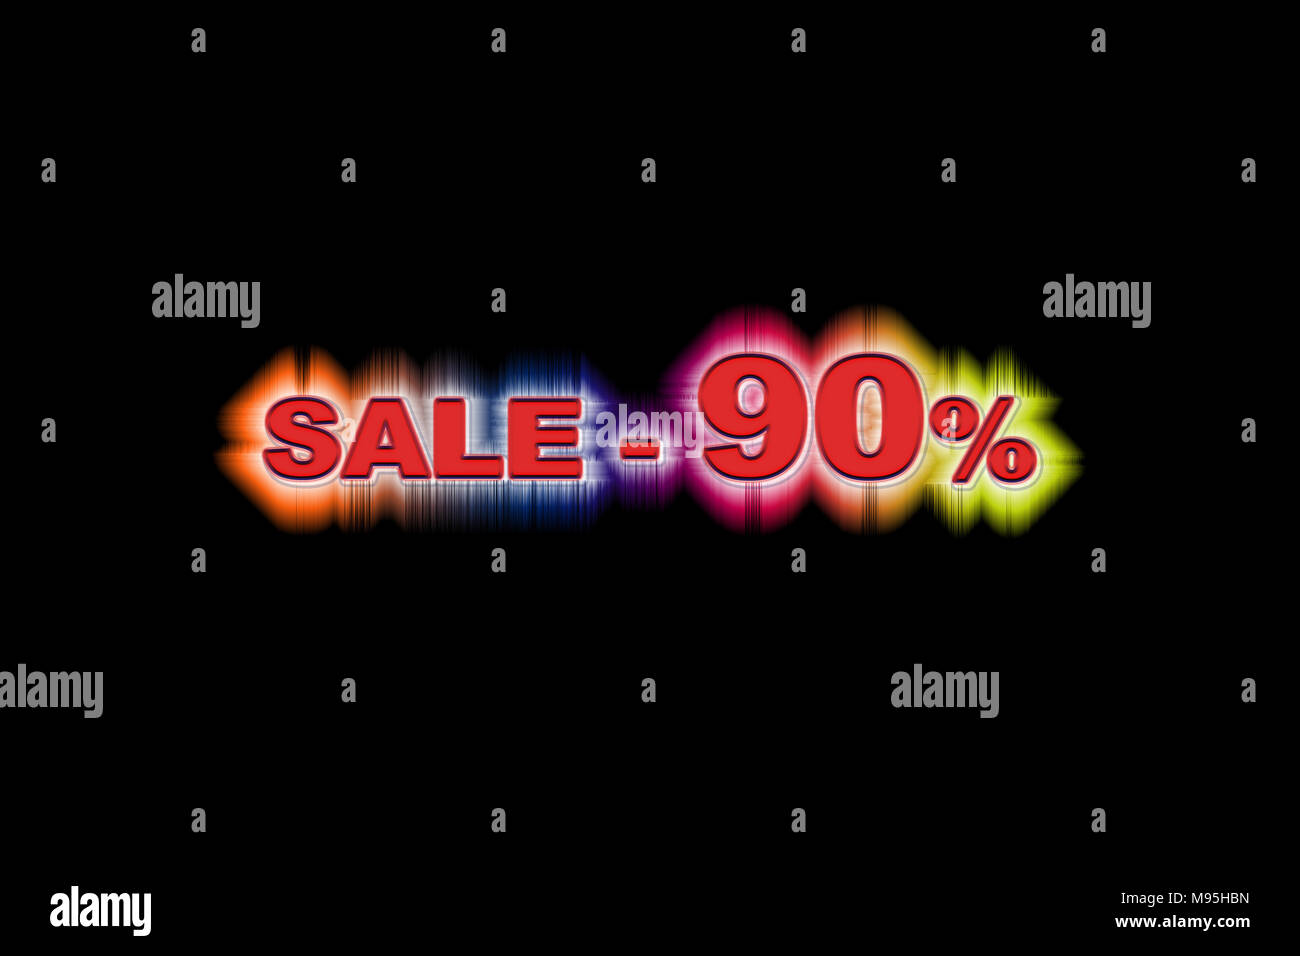 Discount ninety percent of the simulated volume with a rainbow glow on a black background Stock Photo